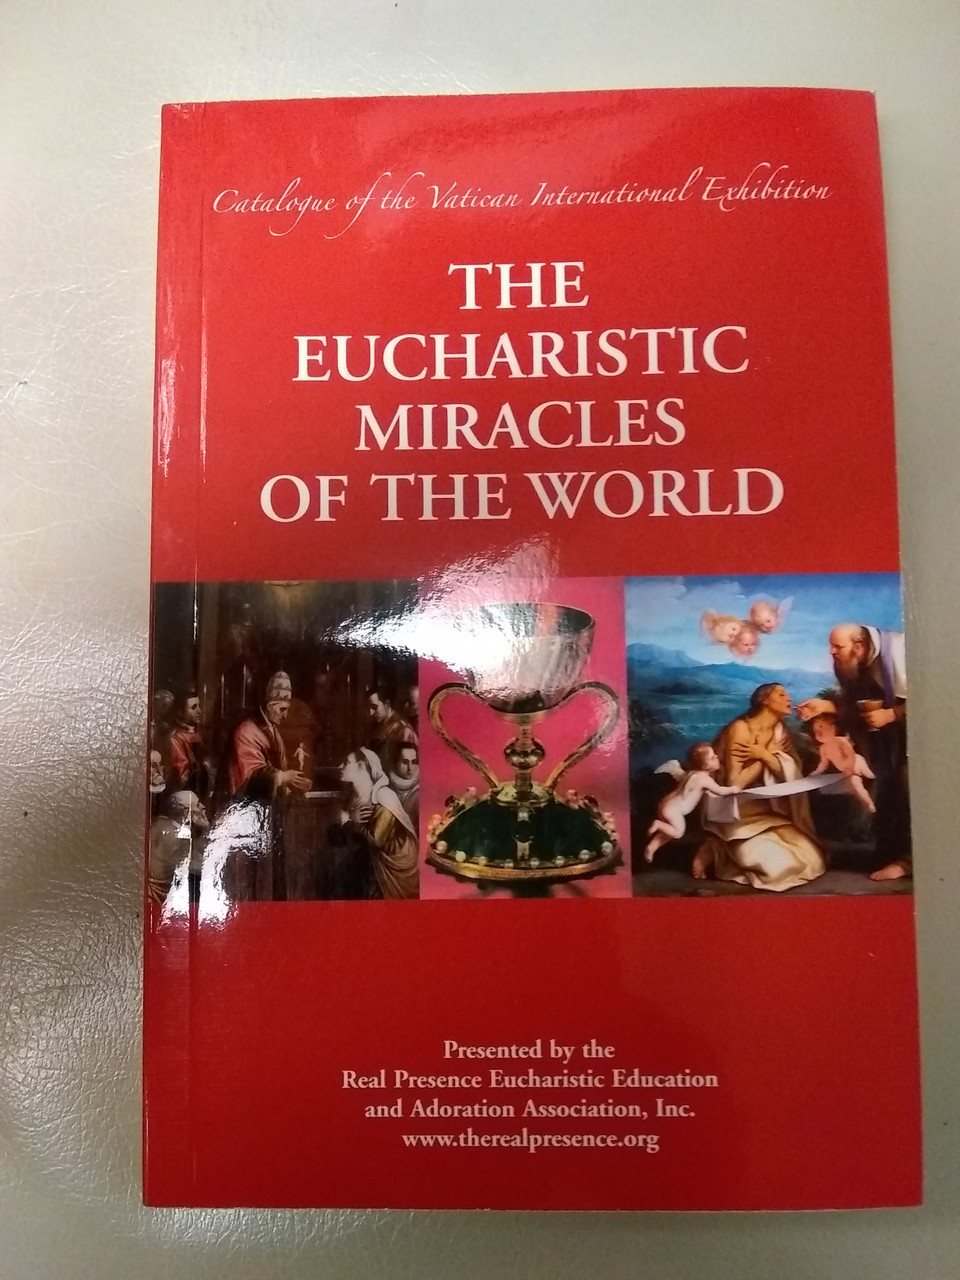 buy Eucharistic Miracles of the World from the Vatican Exhibition from research by Blessed Carlo Acutis
This is a used Book